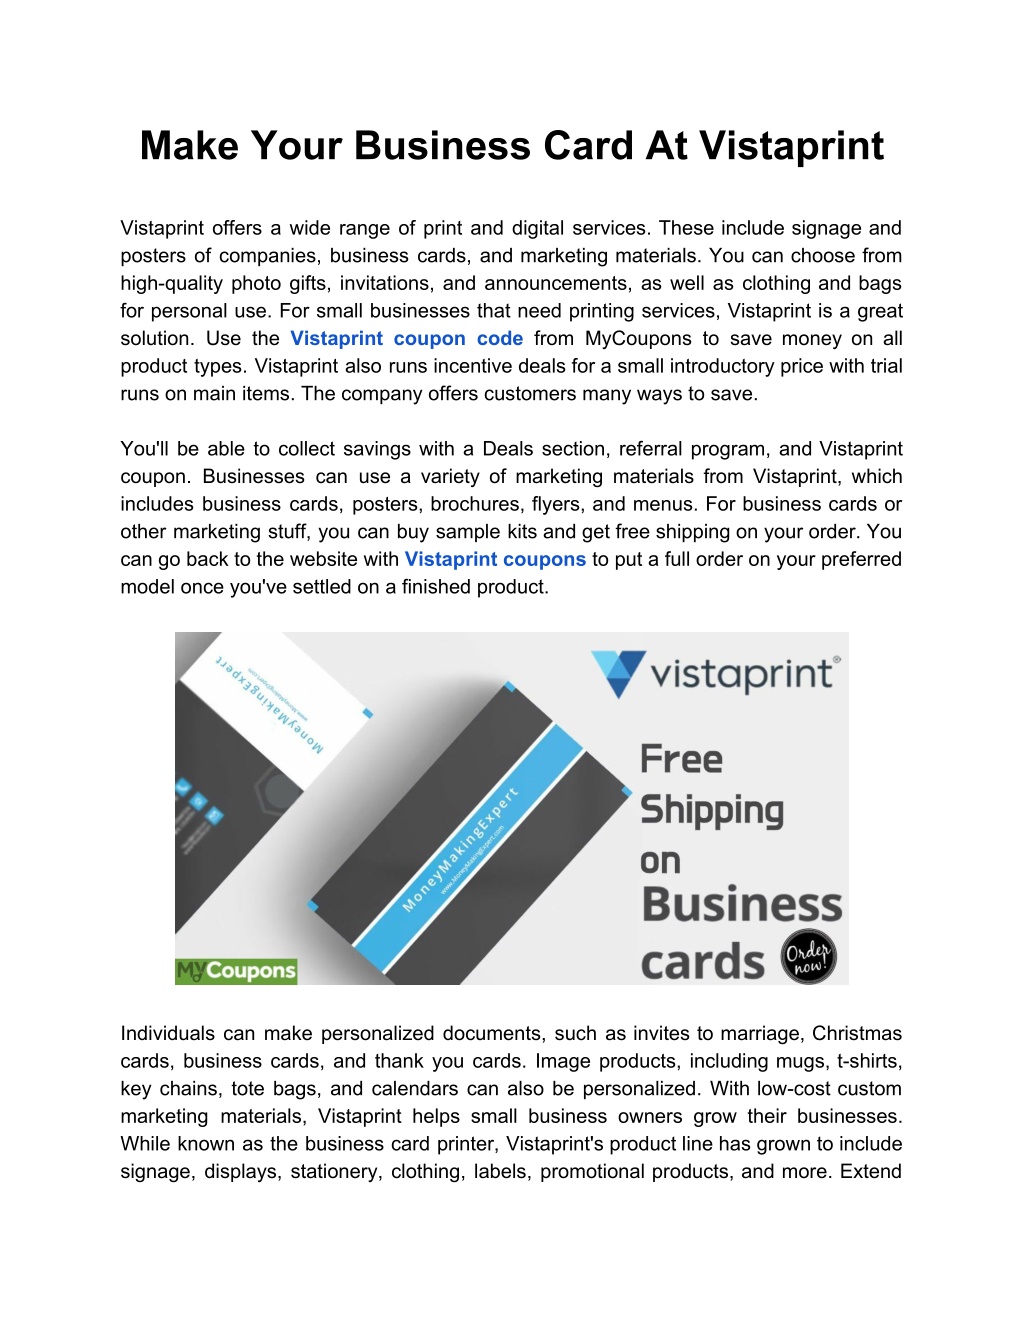 how long does vistaprint take to ship business cards 3